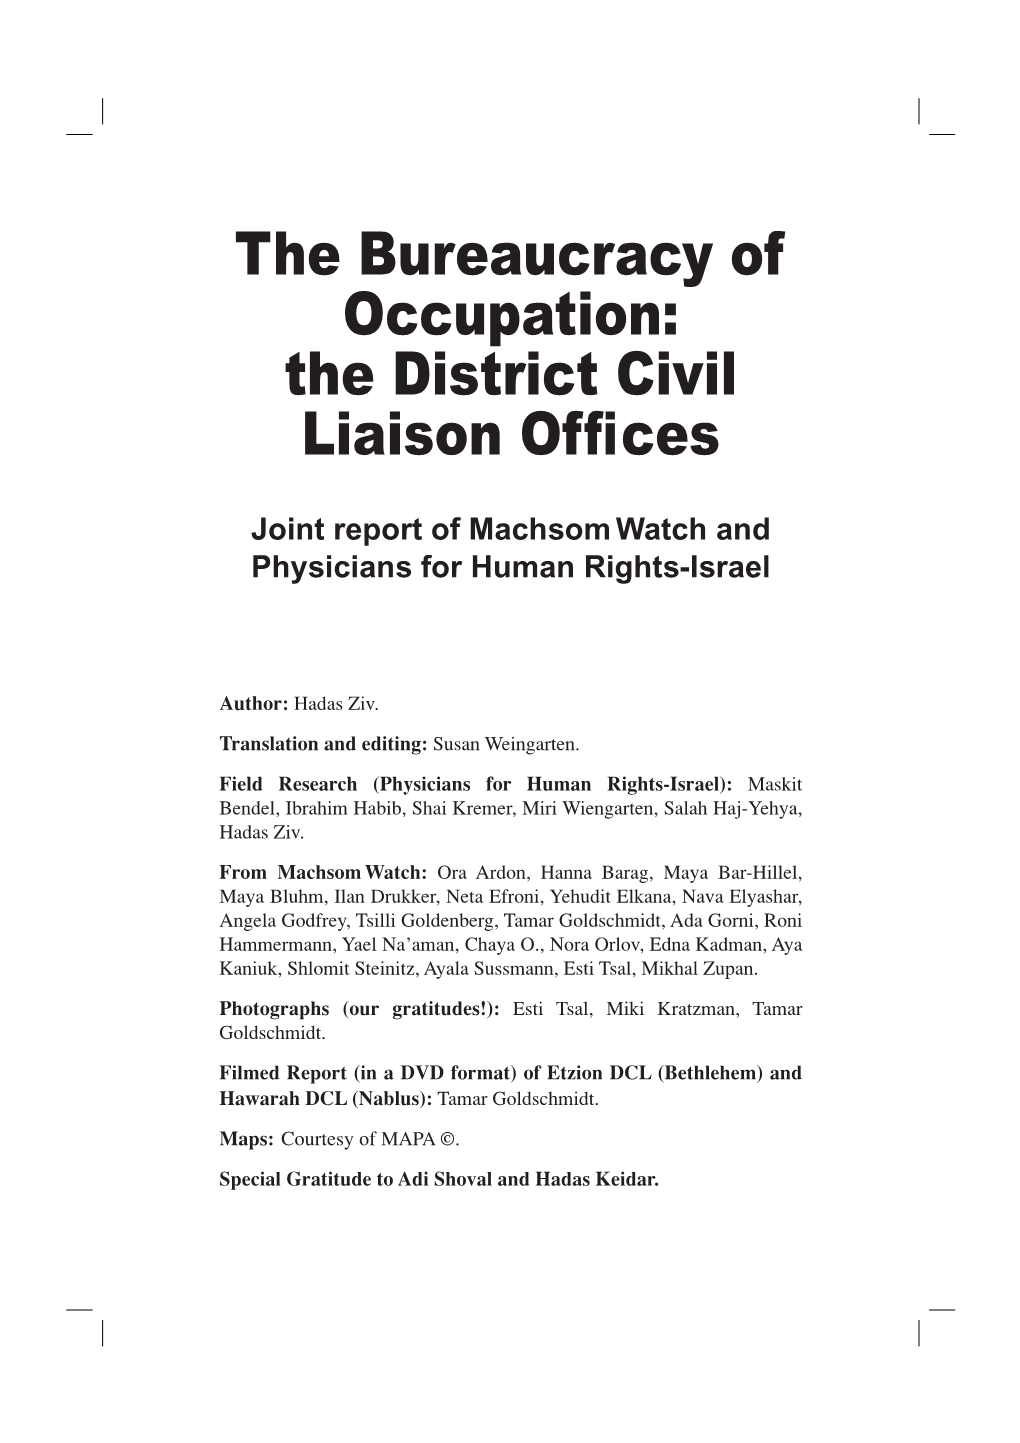 The Bureaucracy of Occupation: the District Civil Liaison Offices